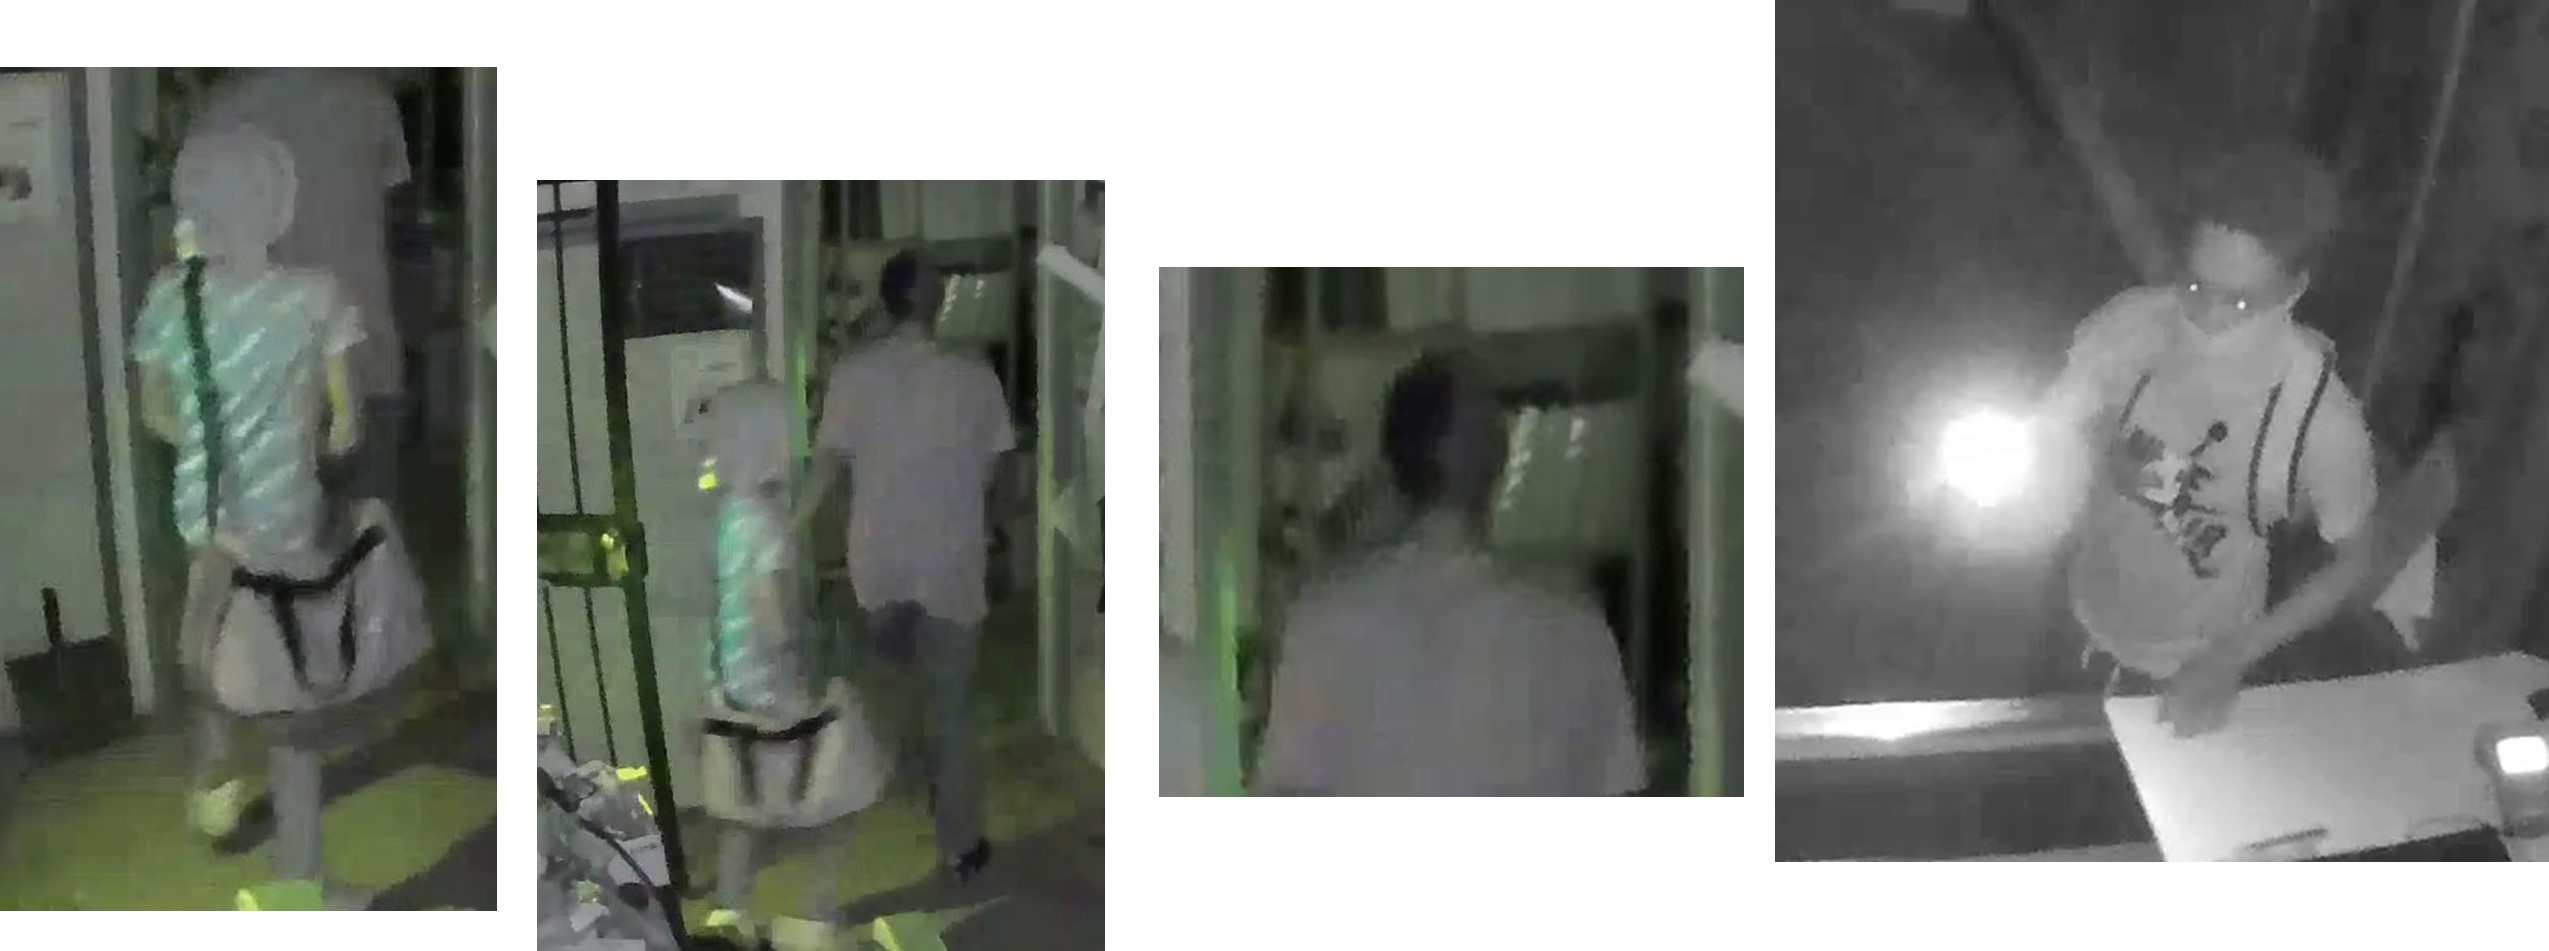 Four images of three suspects entering the Panther City Firearms premises.